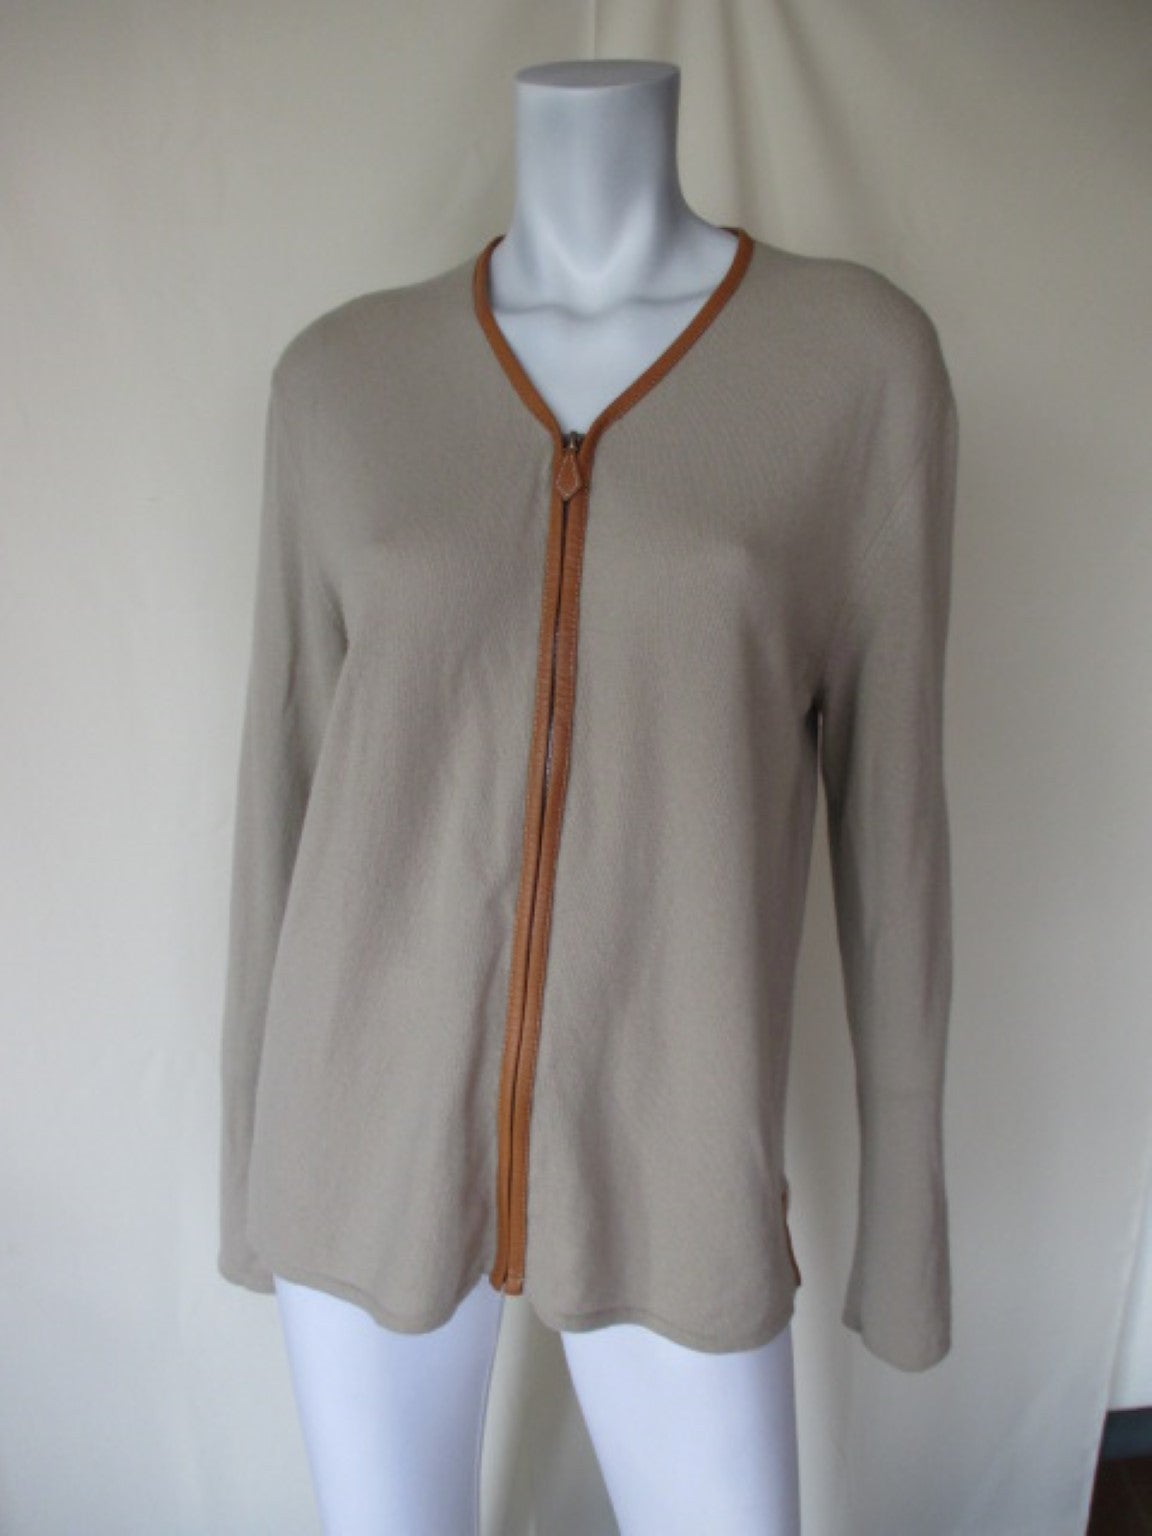 Hermes 100% Cashmere cardigan sweather with leather piping size L 2